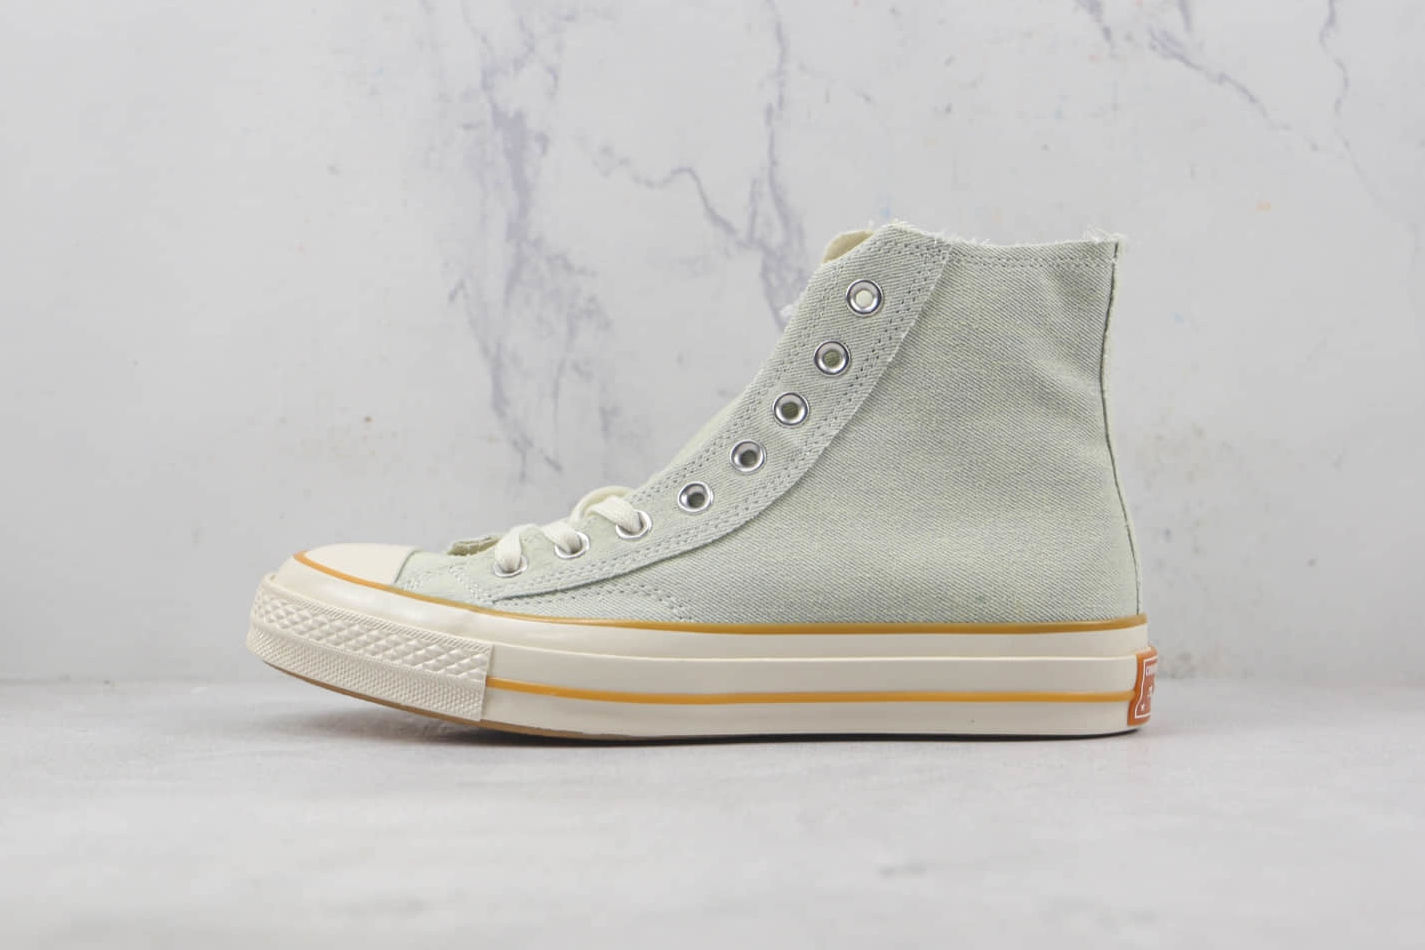 Converse Chuck Taylor All Star 1970s A02287C: Classic Sneakers with Vintage Appeal